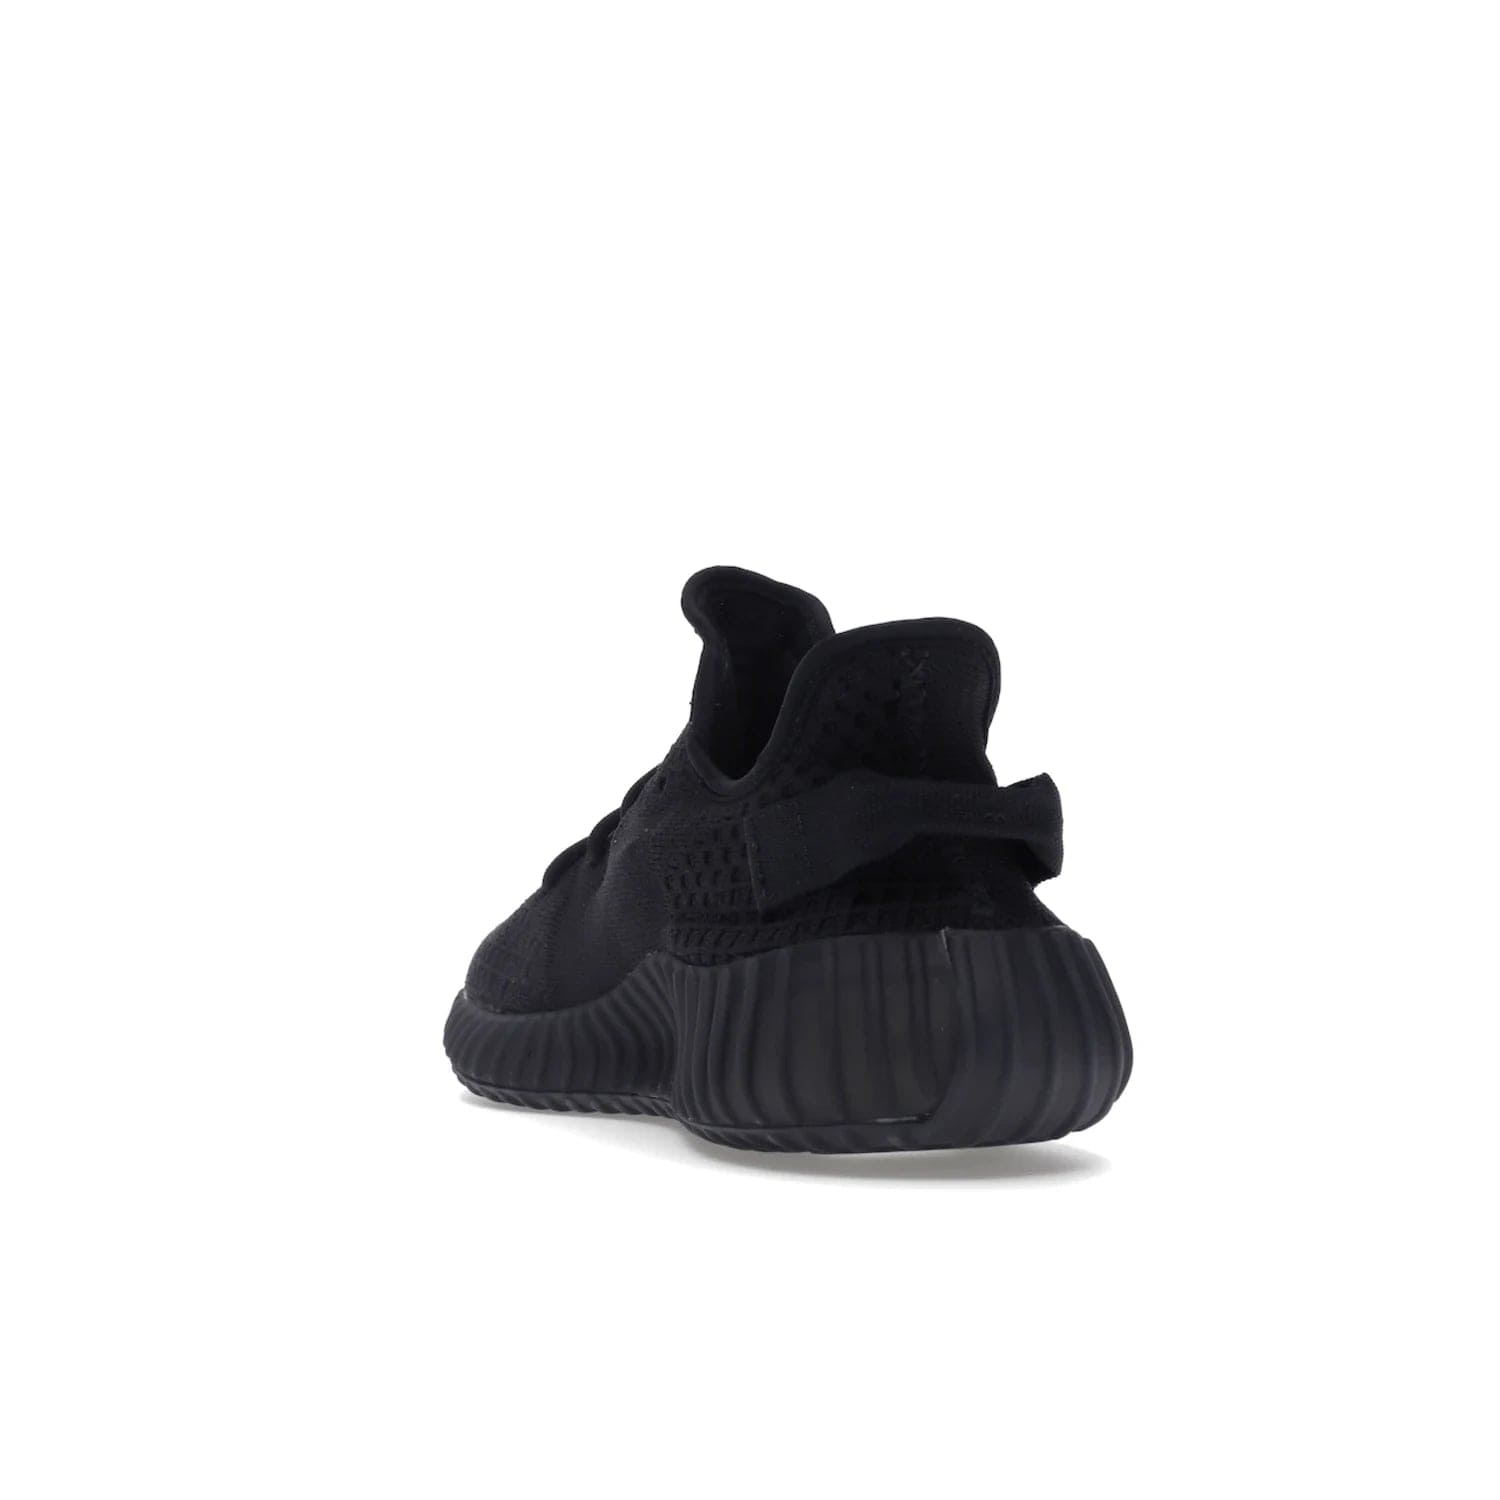 adidas Yeezy Boost 350 V2 Onyx - Image 26 - Only at www.BallersClubKickz.com - Adidas Yeezy Boost 350 V2 Onyx Triple Black shoes for comfort and style. Arriving Spring 2022.